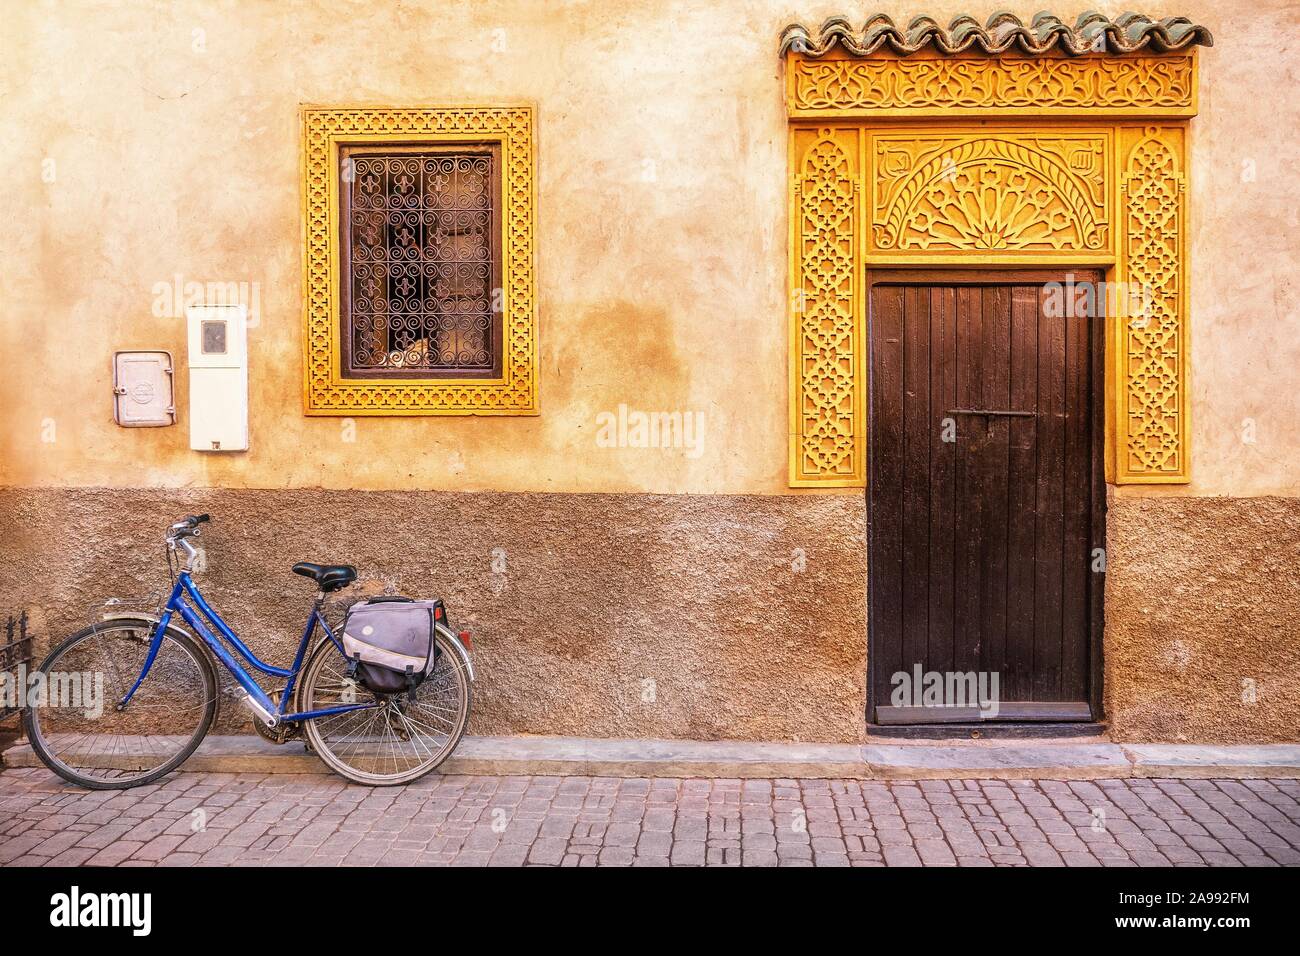 Street view of old house exterior in Morocco, with a wooden door, fancy gold colored window and door frames, and a bicycle parked in front. Stock Photo